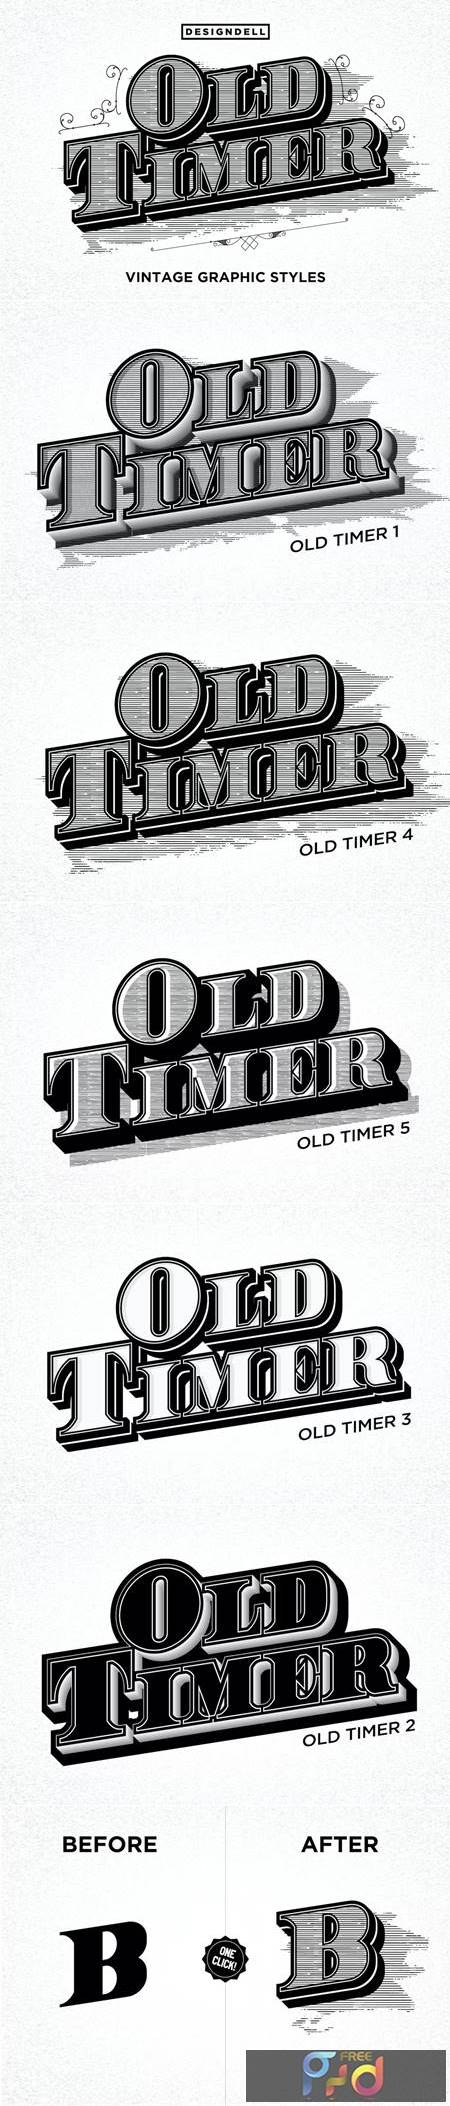 Old Timer Vintage Graphic Styles 7RCS6X2 1